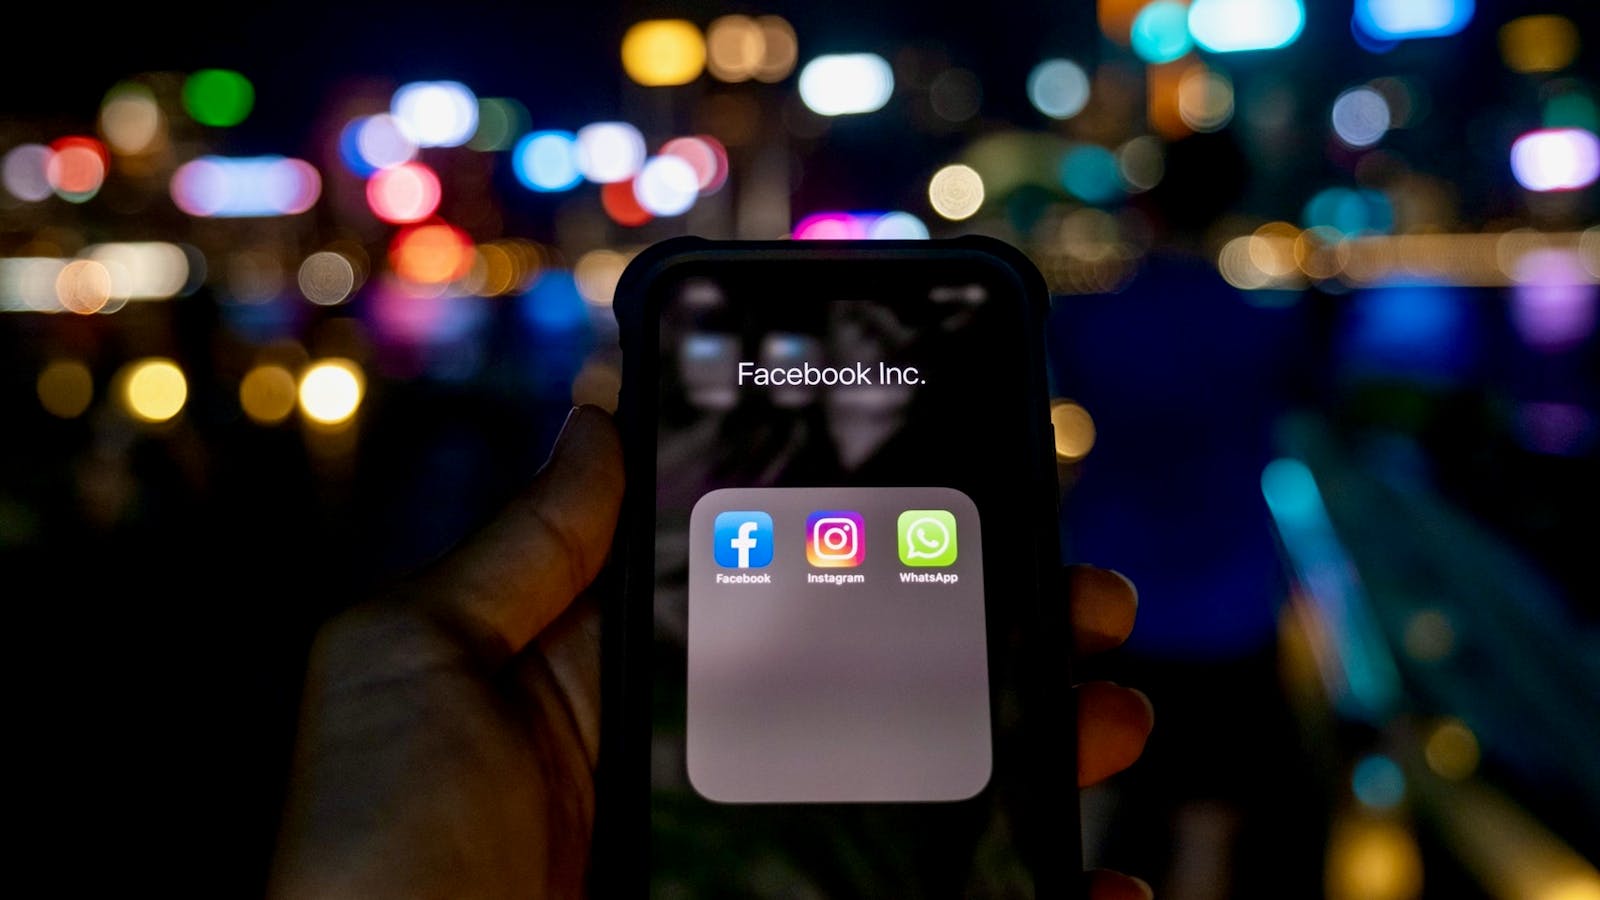 Facebook launched its TikTok competitor Reels, a feature of Instagram, into the U.S. and other markets on Wednesday. Photo: Bloomberg